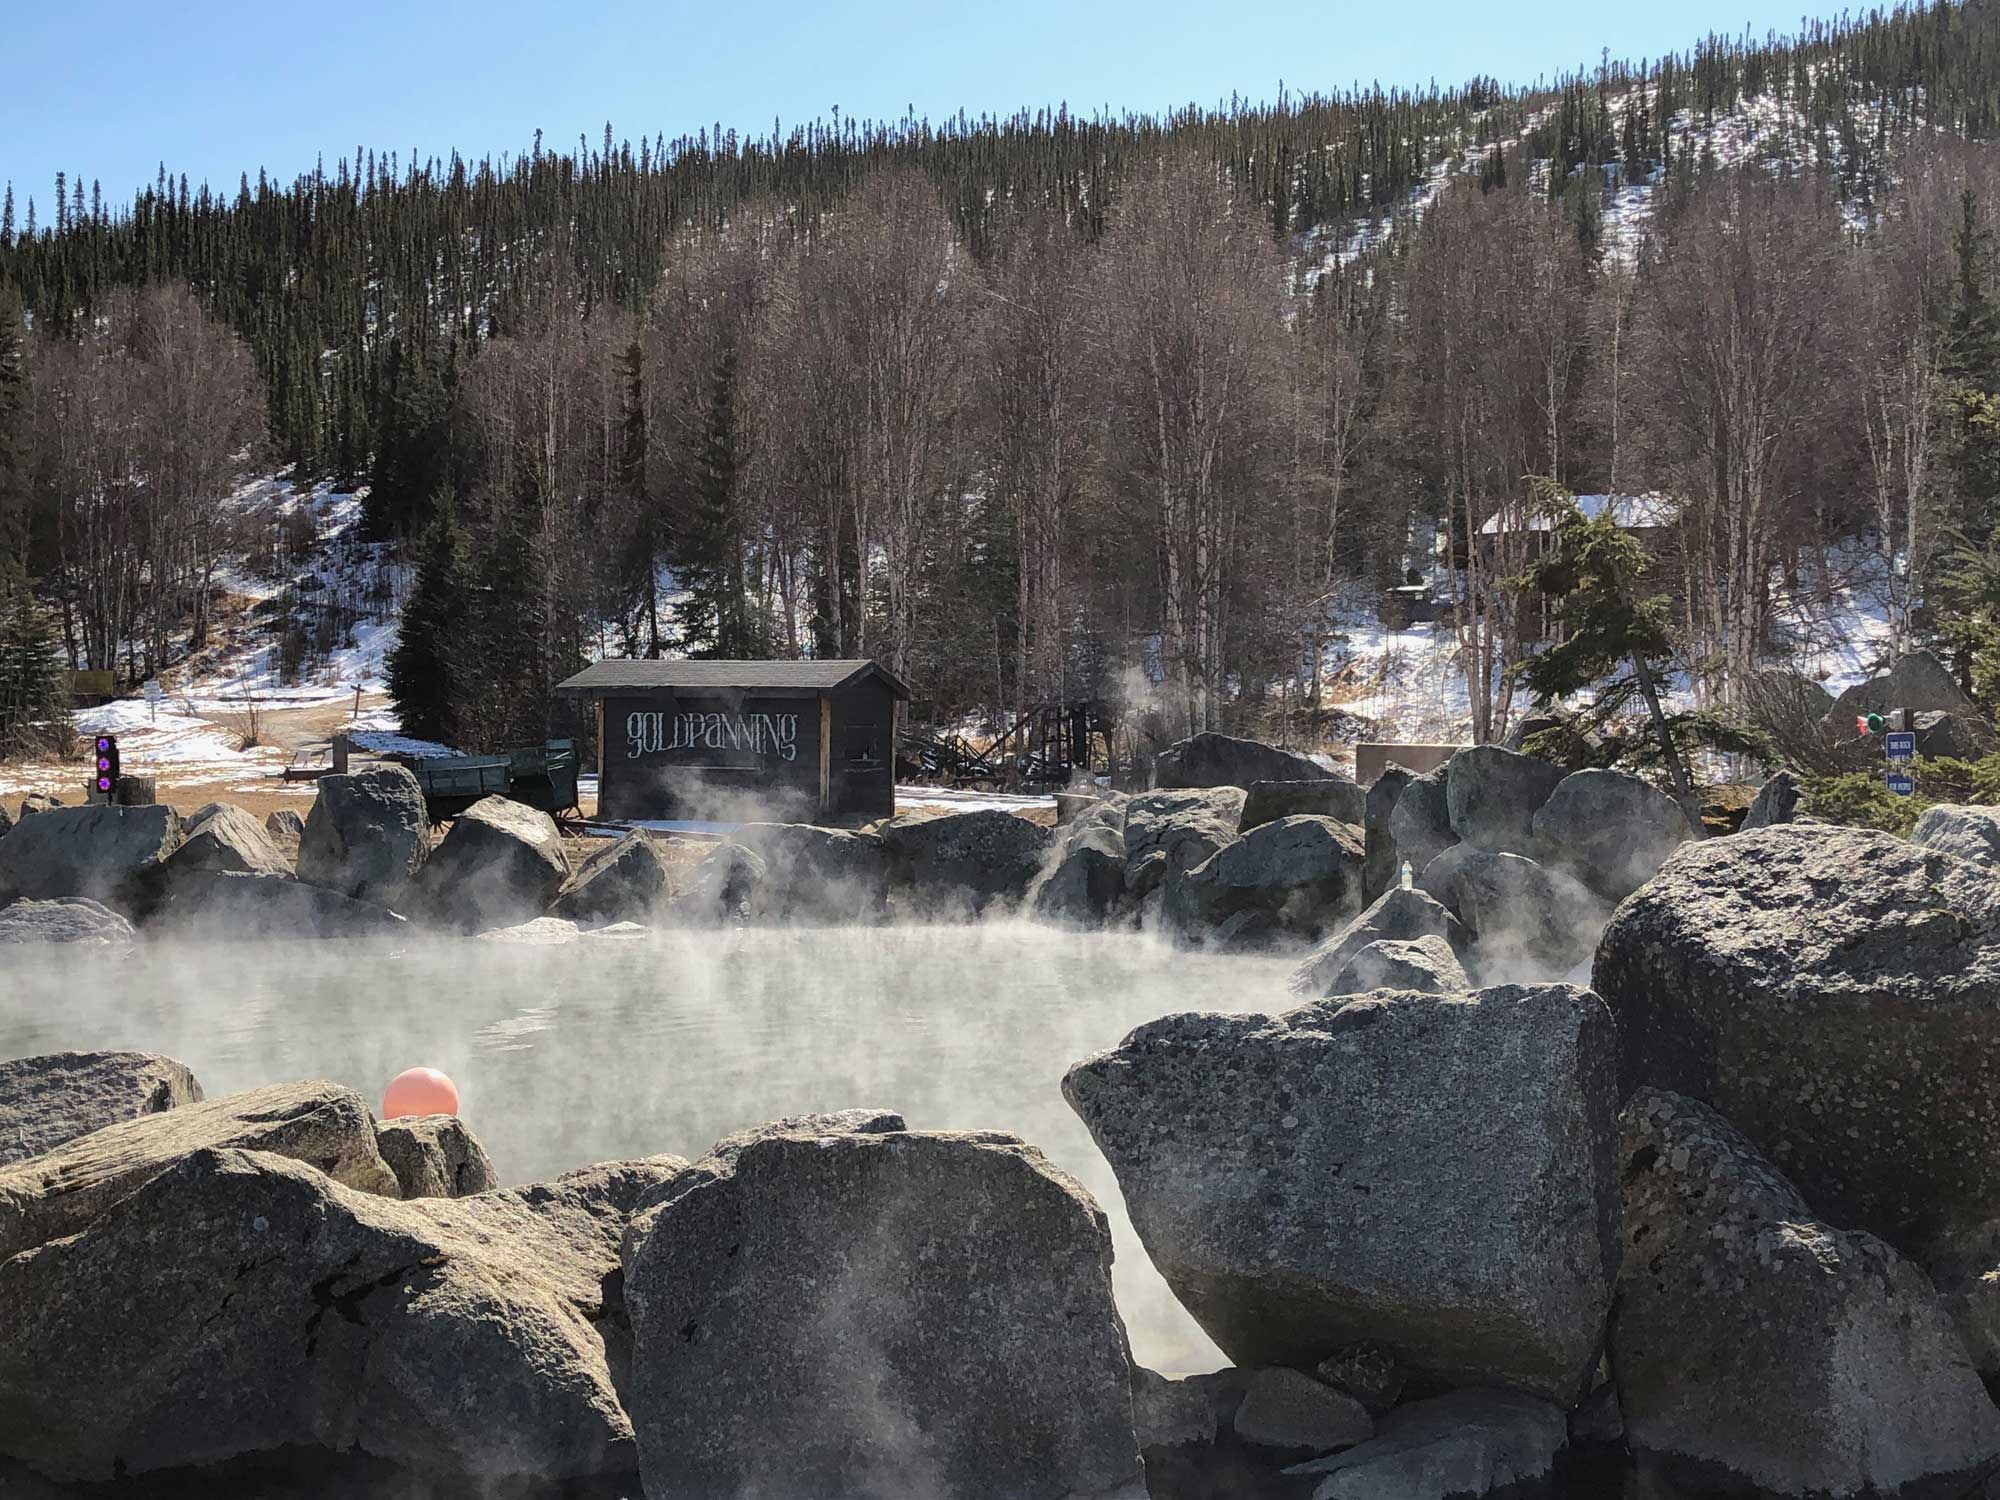 Photograph of a thermal pool at Chena Hot Springs, Alaska. The photo shows a pool of water surrounded by rocks. Steam hangs on the top of the pool. A hill covered with trees and snow rises in the background.